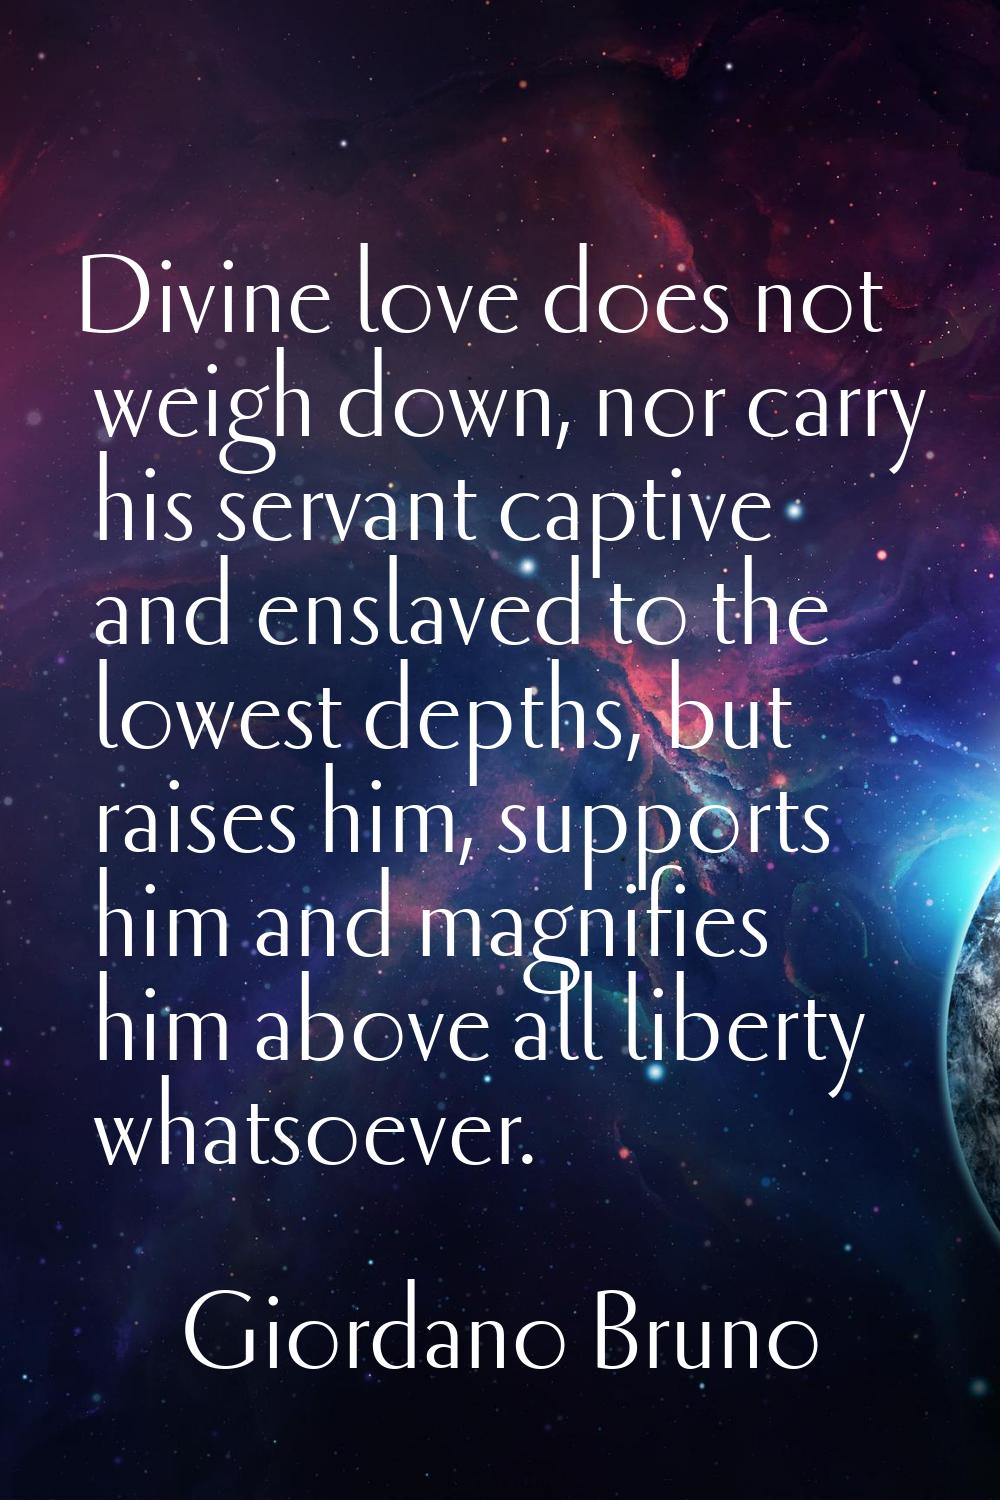 Divine love does not weigh down, nor carry his servant captive and enslaved to the lowest depths, b